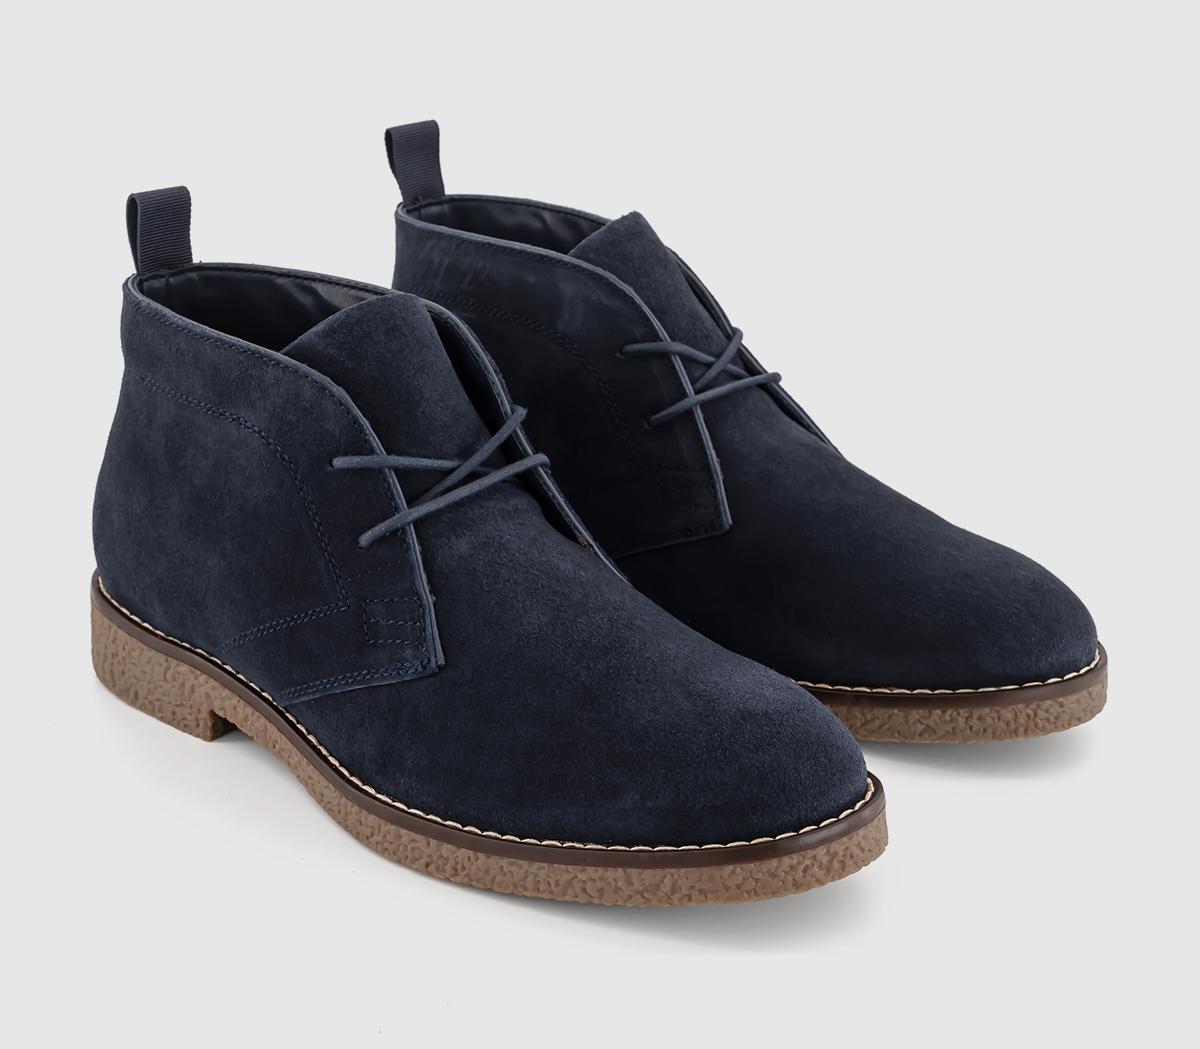 OFFICE Mens Byron Suede Desert Boots Navy Blue, 7